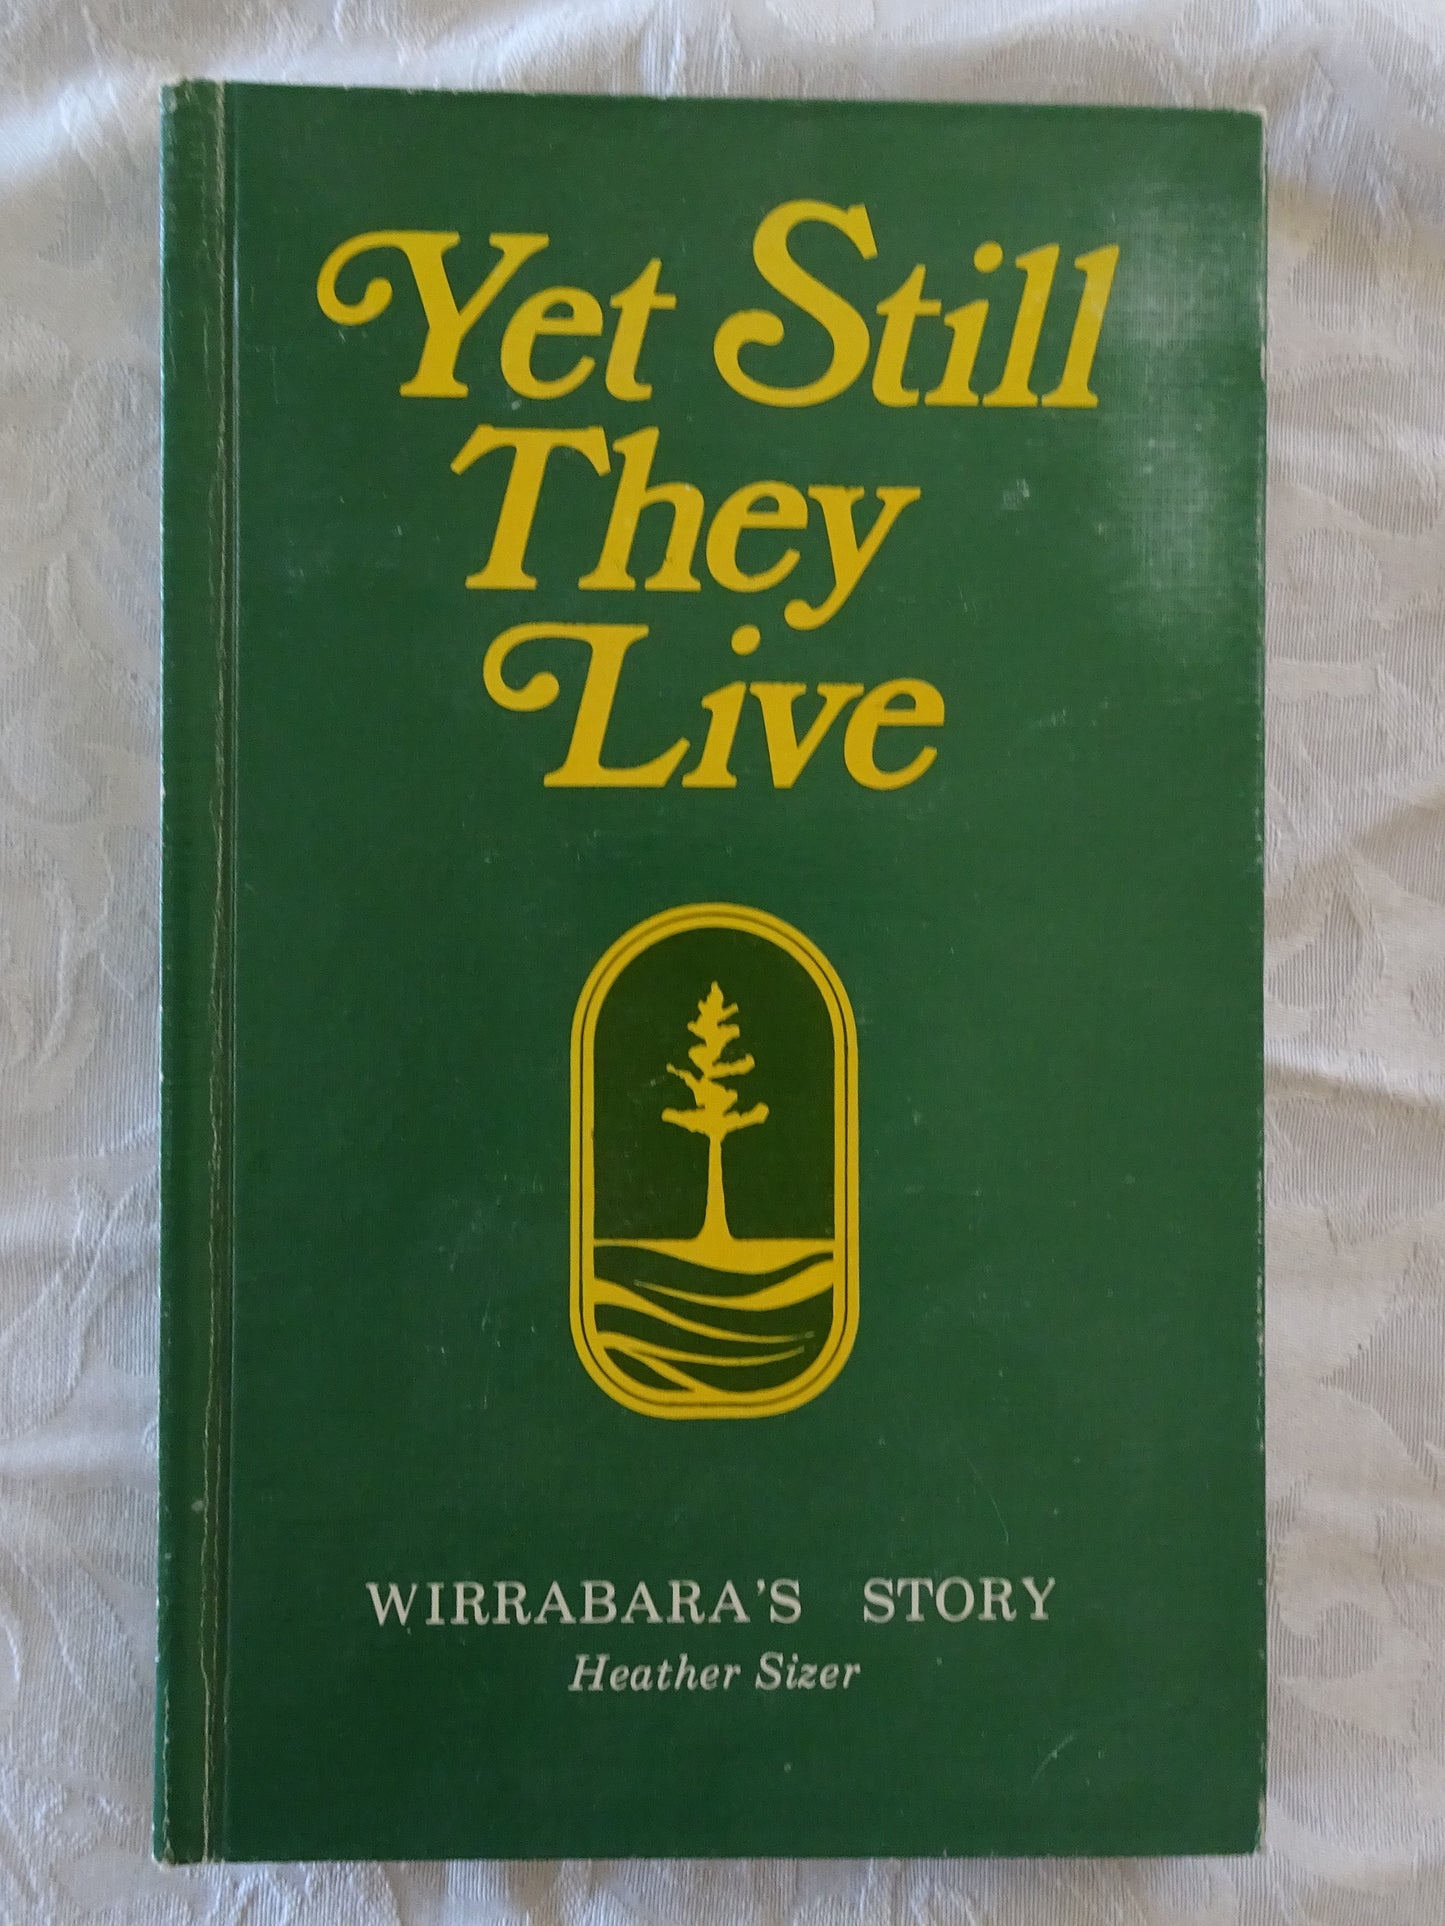 Yet Still They Live by Heather Sizer